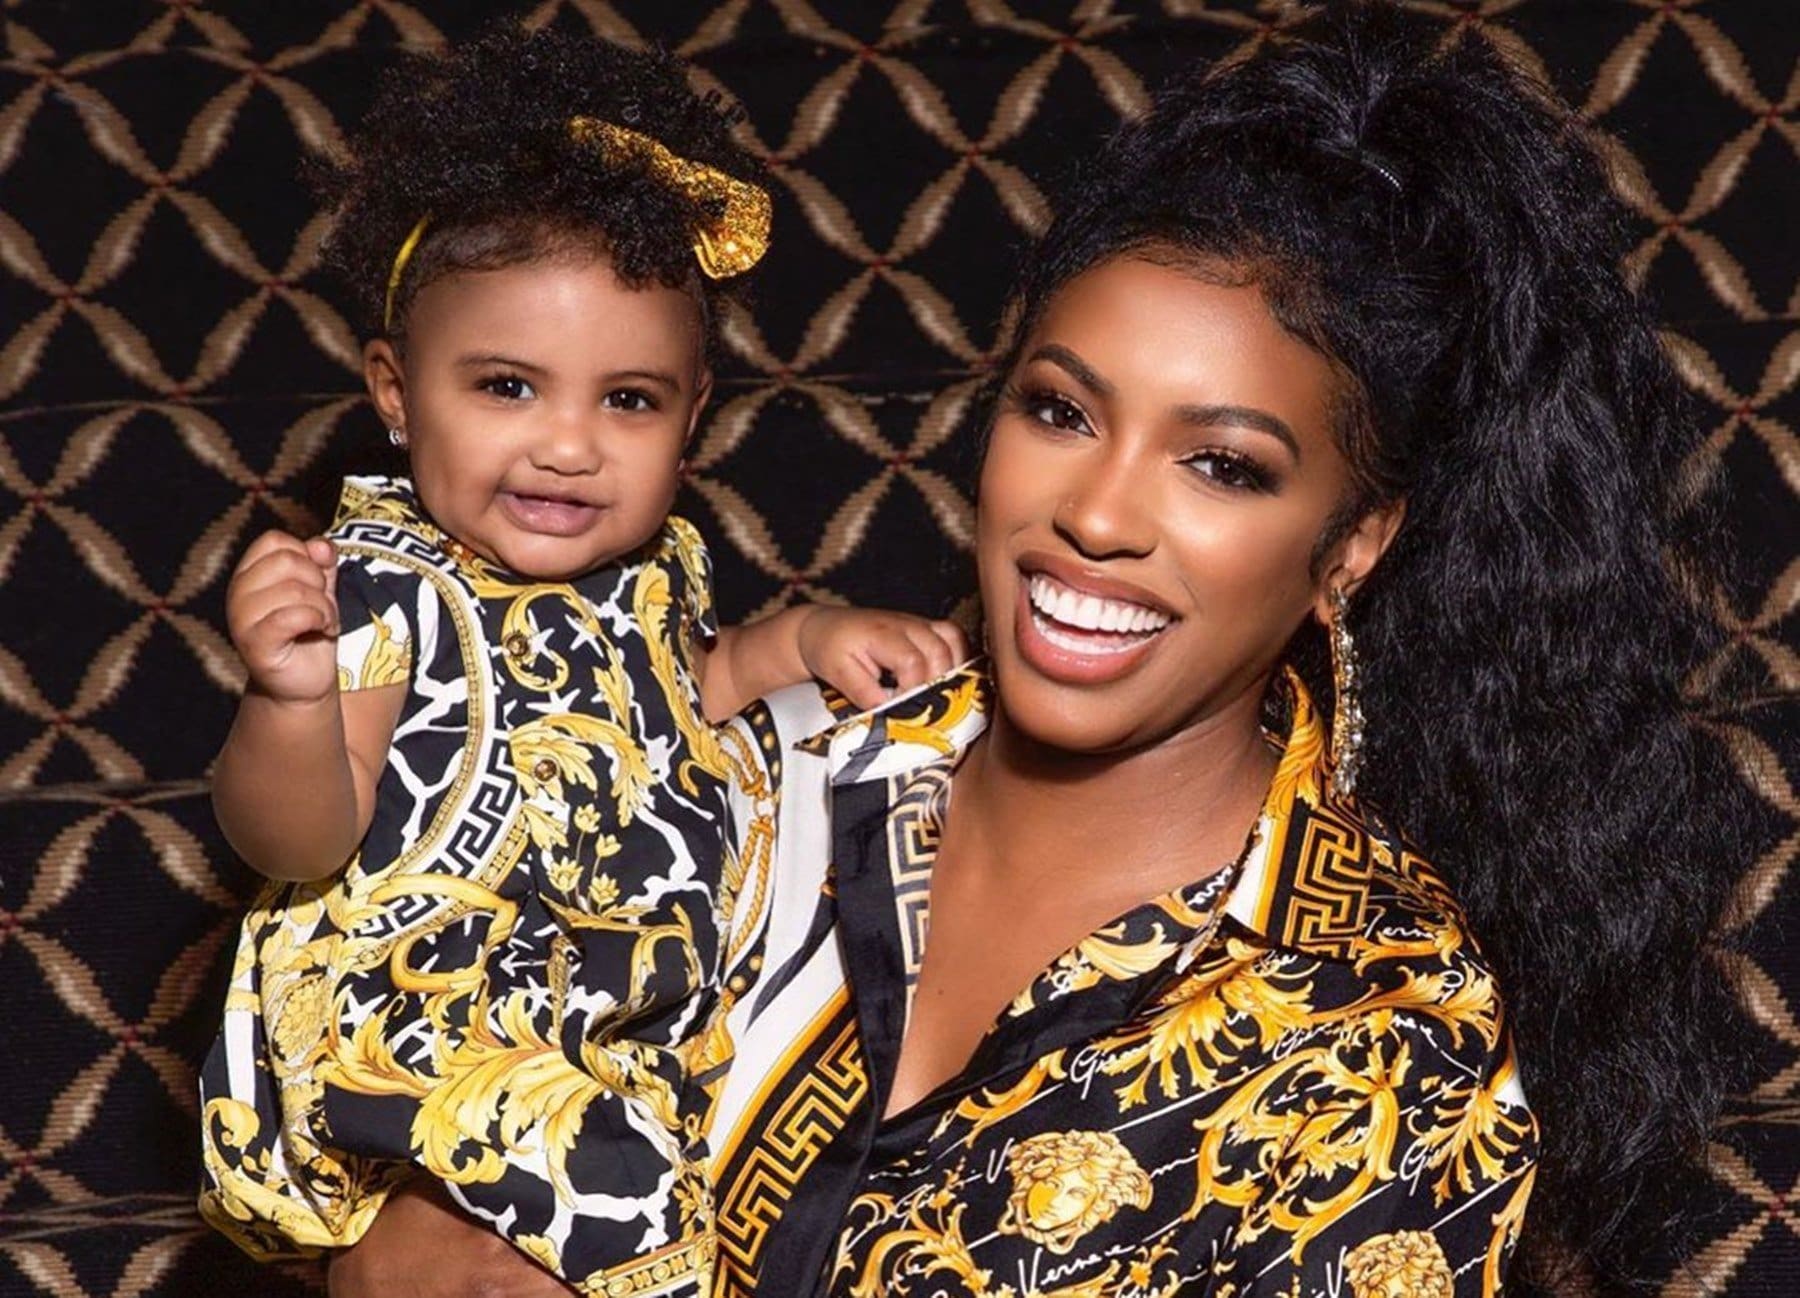 porsha-williams-will-make-your-day-with-this-video-featuring-her-baby-girl-pilar-jhena